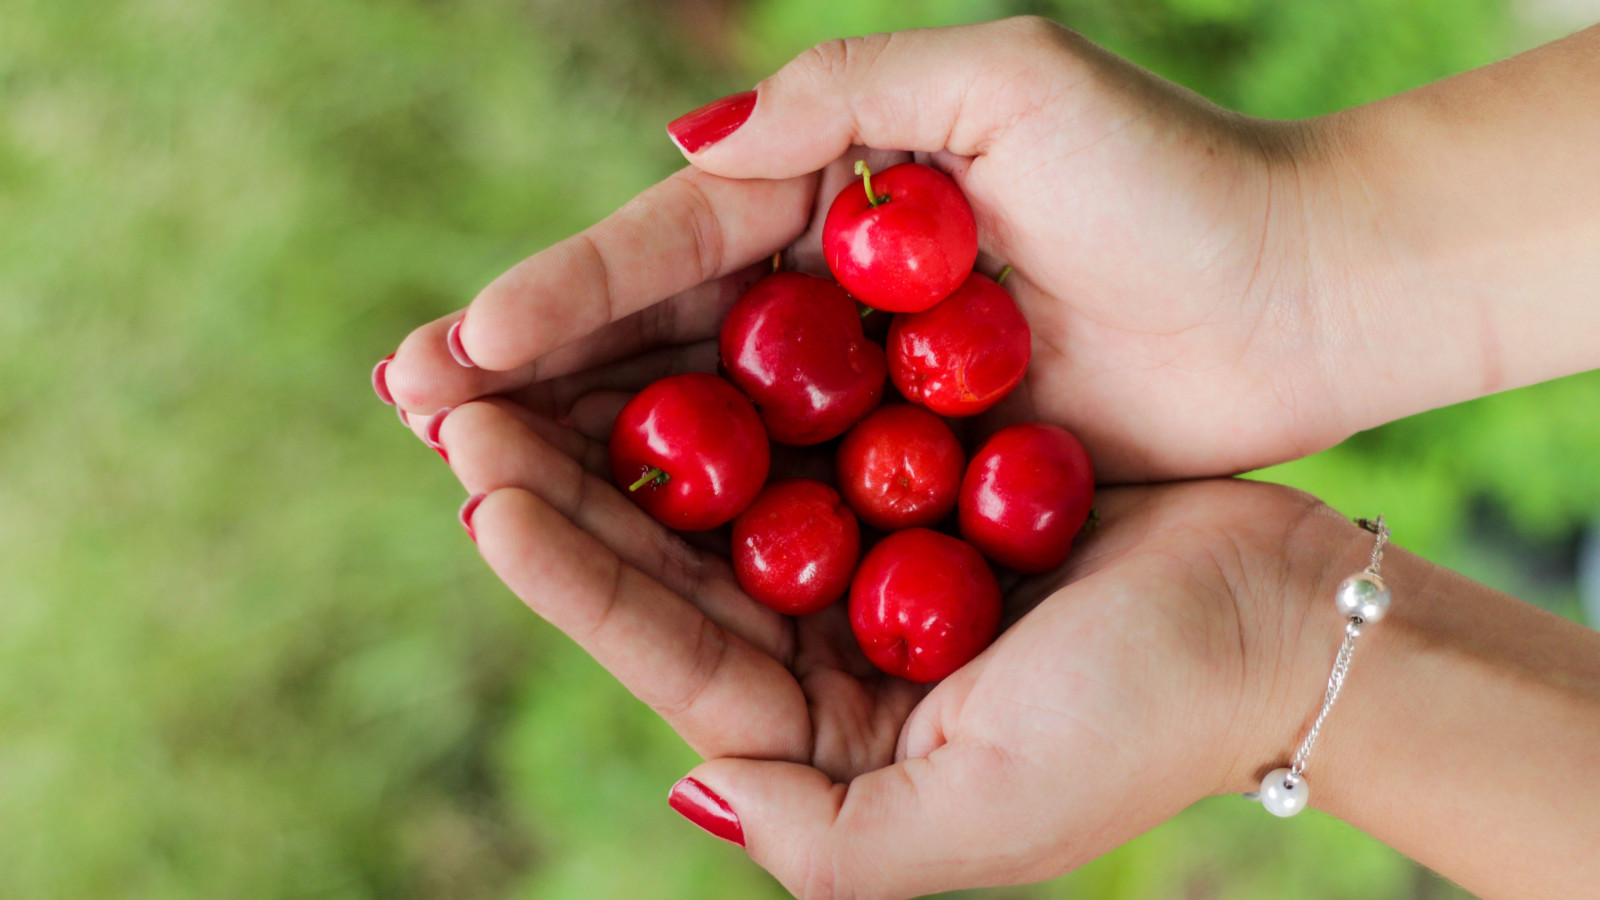 Hands filled with cherries wallpaper 1600x900